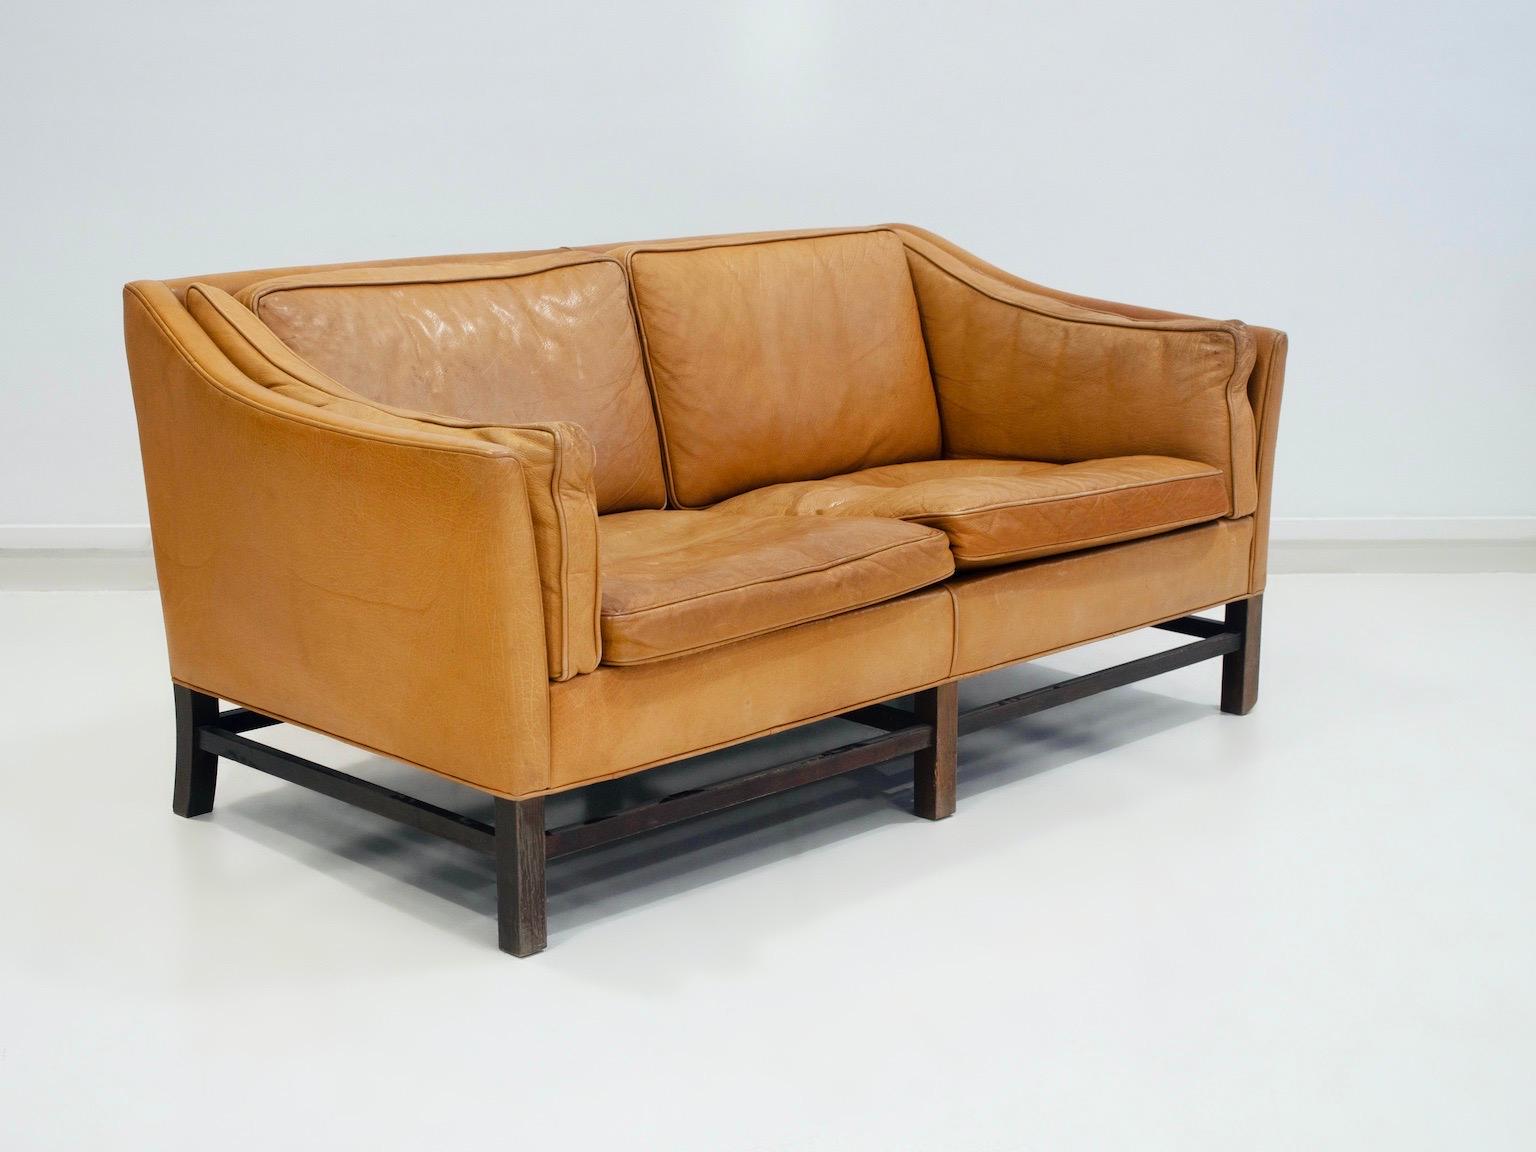 Two-seater caramel brown leather sofa designed in Denmark and manufactured by Grant in circa 1970/80s. Mahogany wood base and leather upholstery with patina due to age and use. Seat and backrest with loose cushions. Comfortable sofa that combines